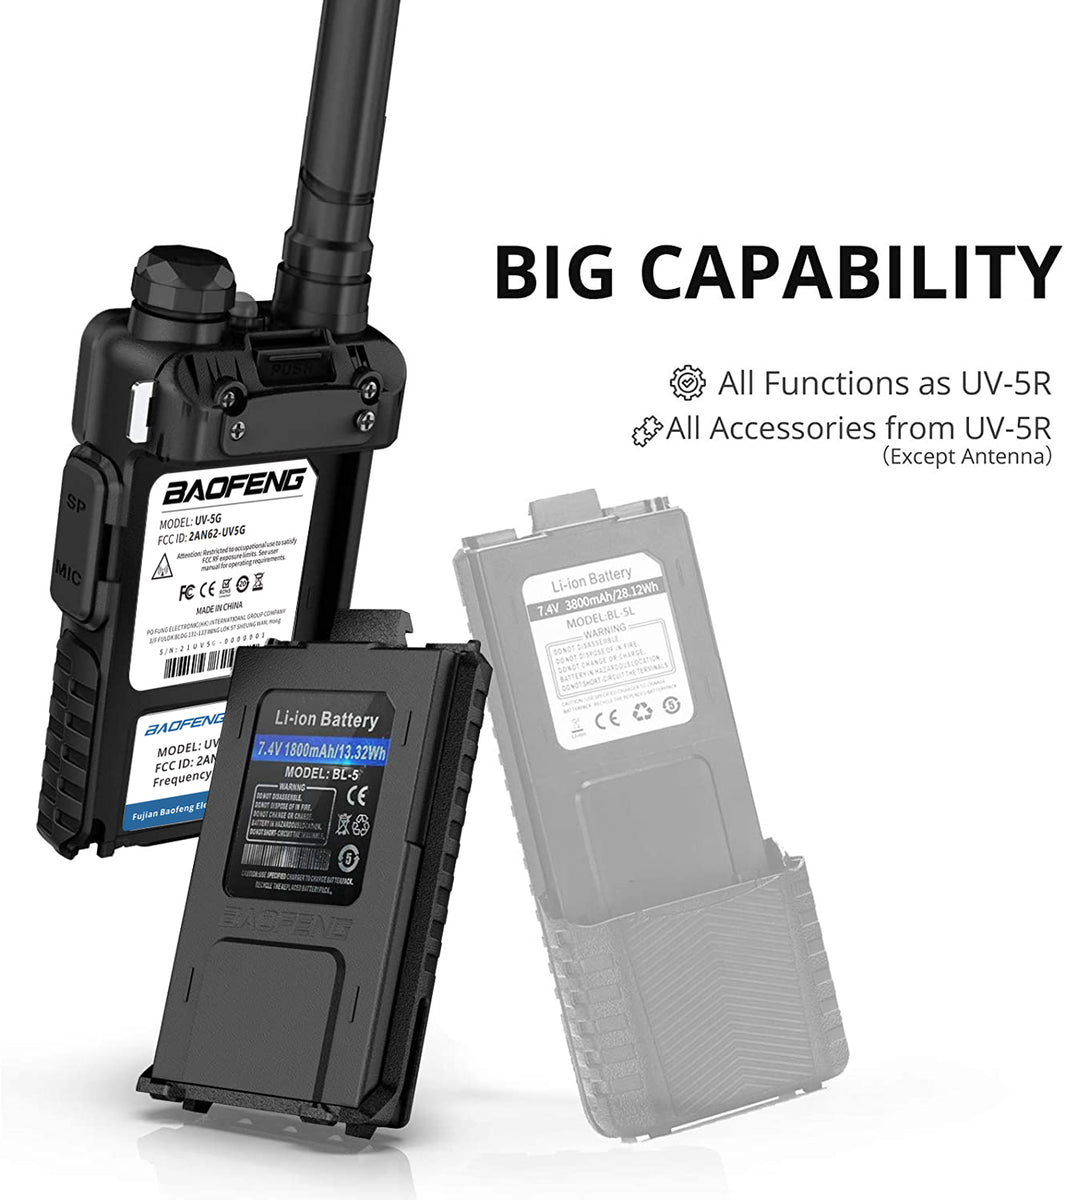 Ham Radio Handheld (UV-5R 8W) Dual Band 2-Way Radio with Rechargeable 1800mAh Battery Handheld Walkie Talkies Complete Set with Earpiece and Program - 4